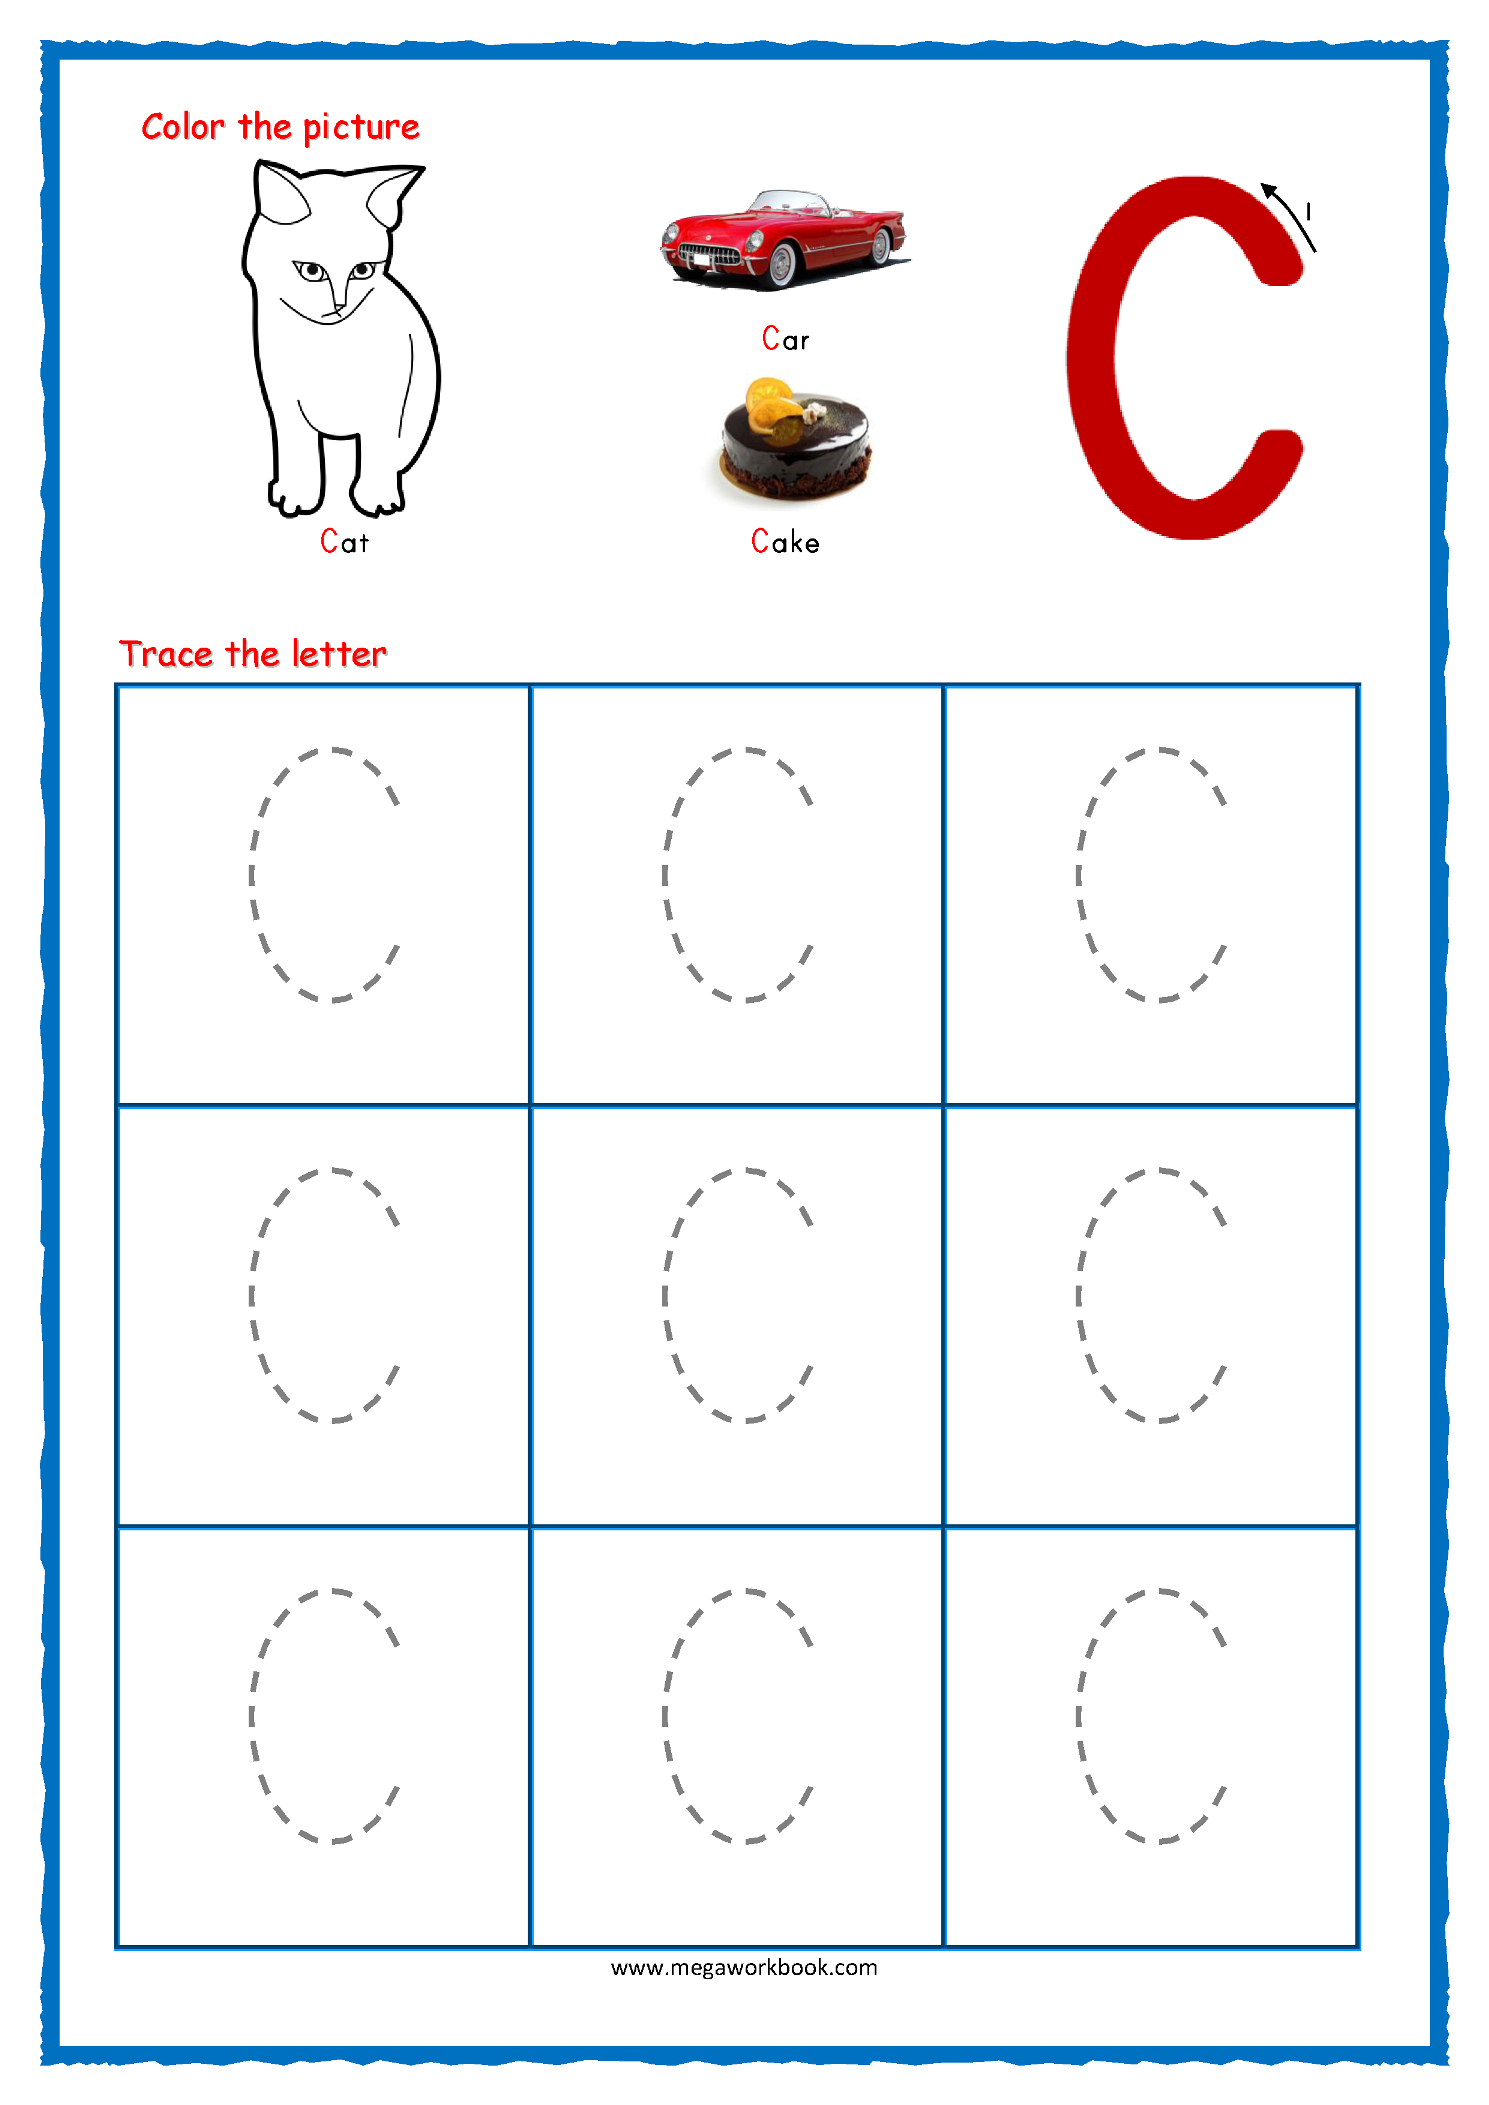 Tracing Letters - Alphabet Tracing - Capital Letters - Letter